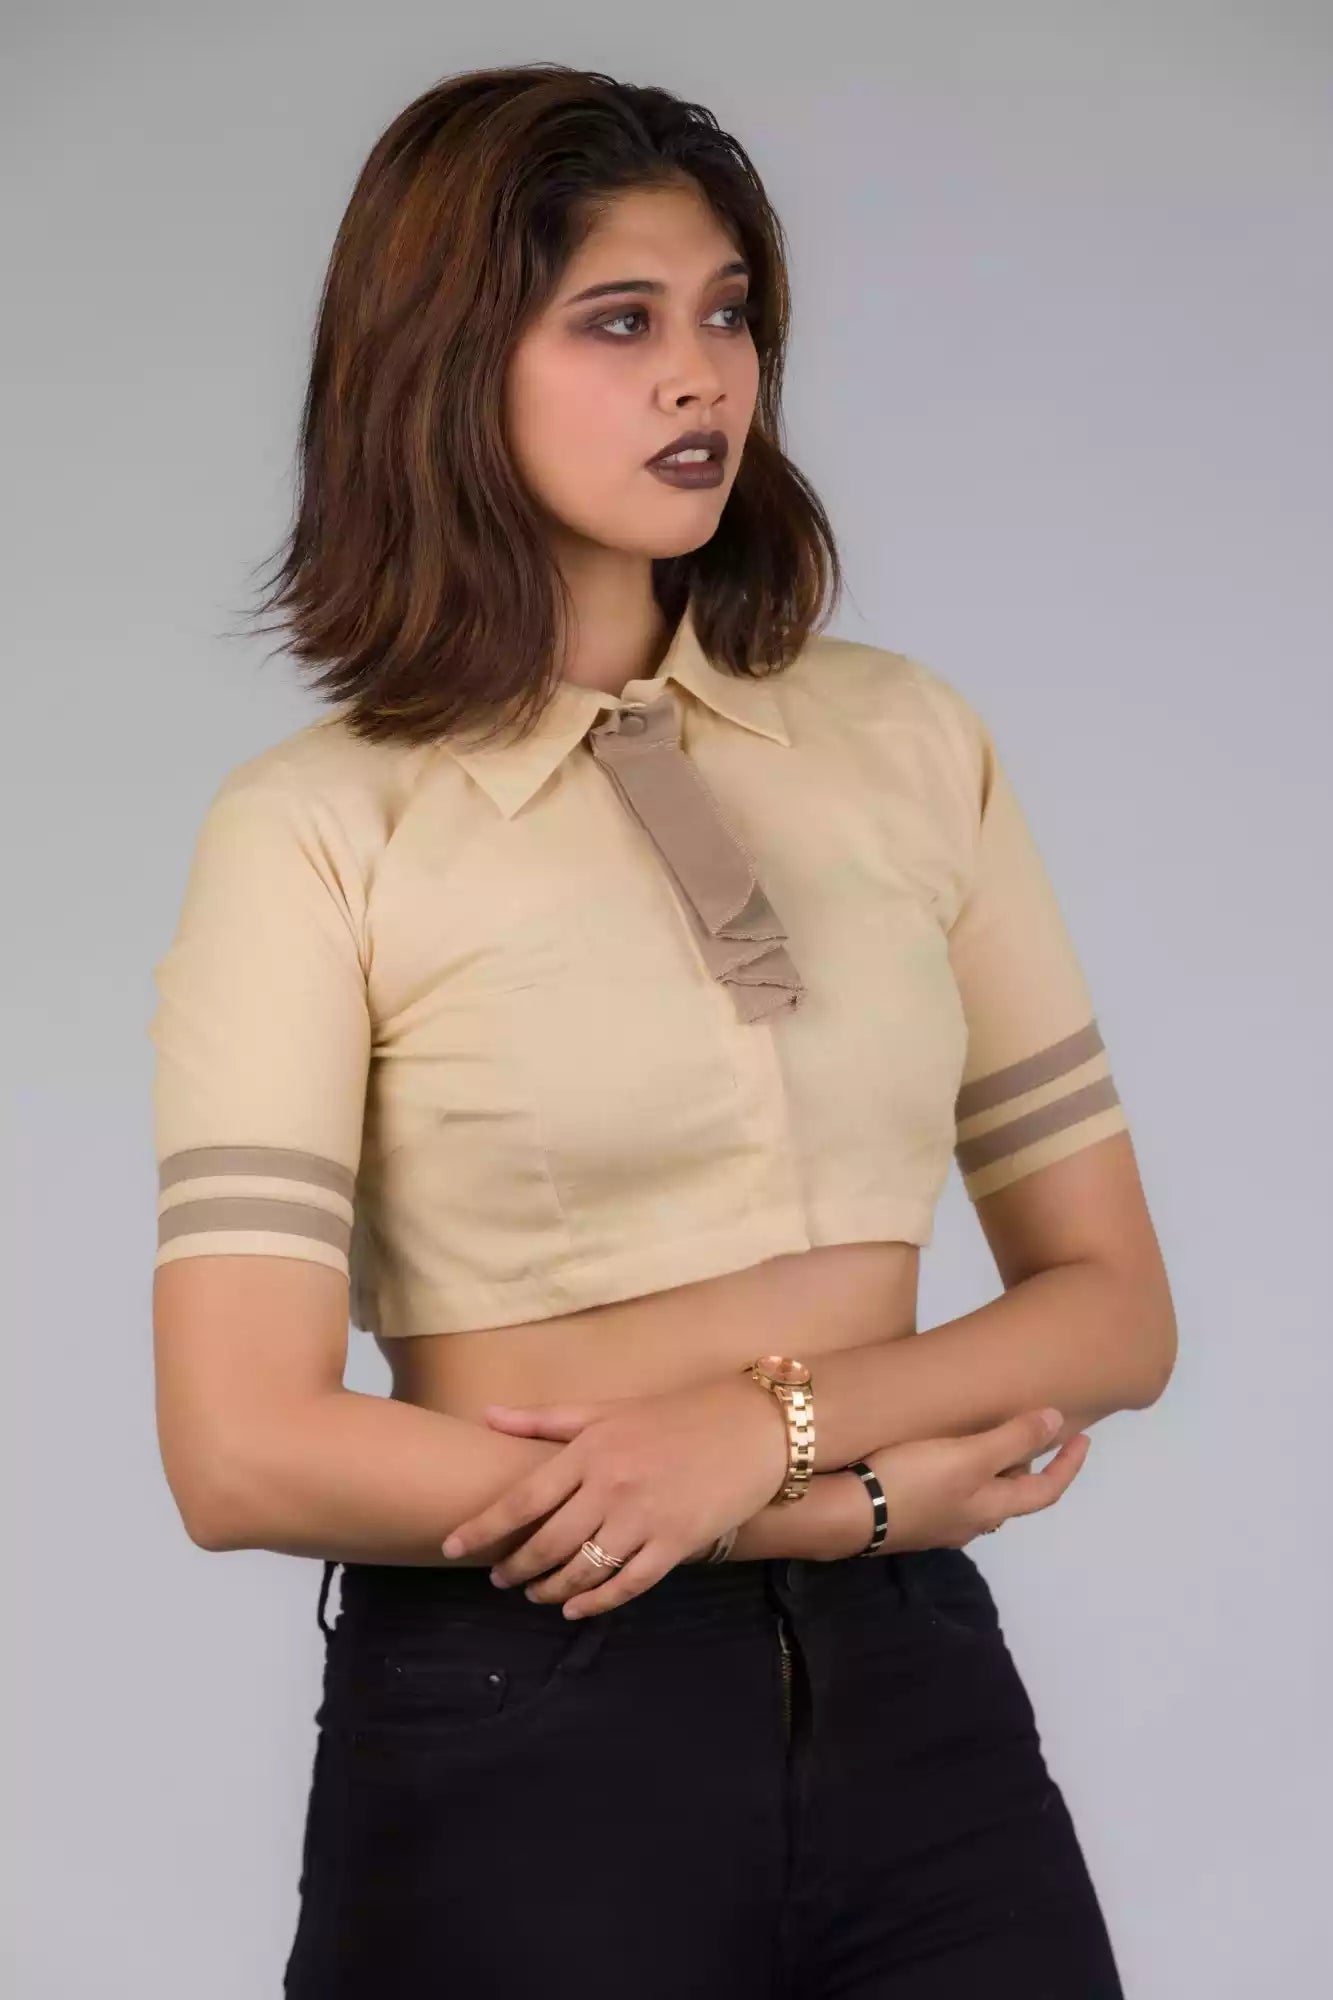 A picture of Light Beige Blouse with removeable Brown tie In Pure Cotton, womens workwear standing against a grey background looking sideways